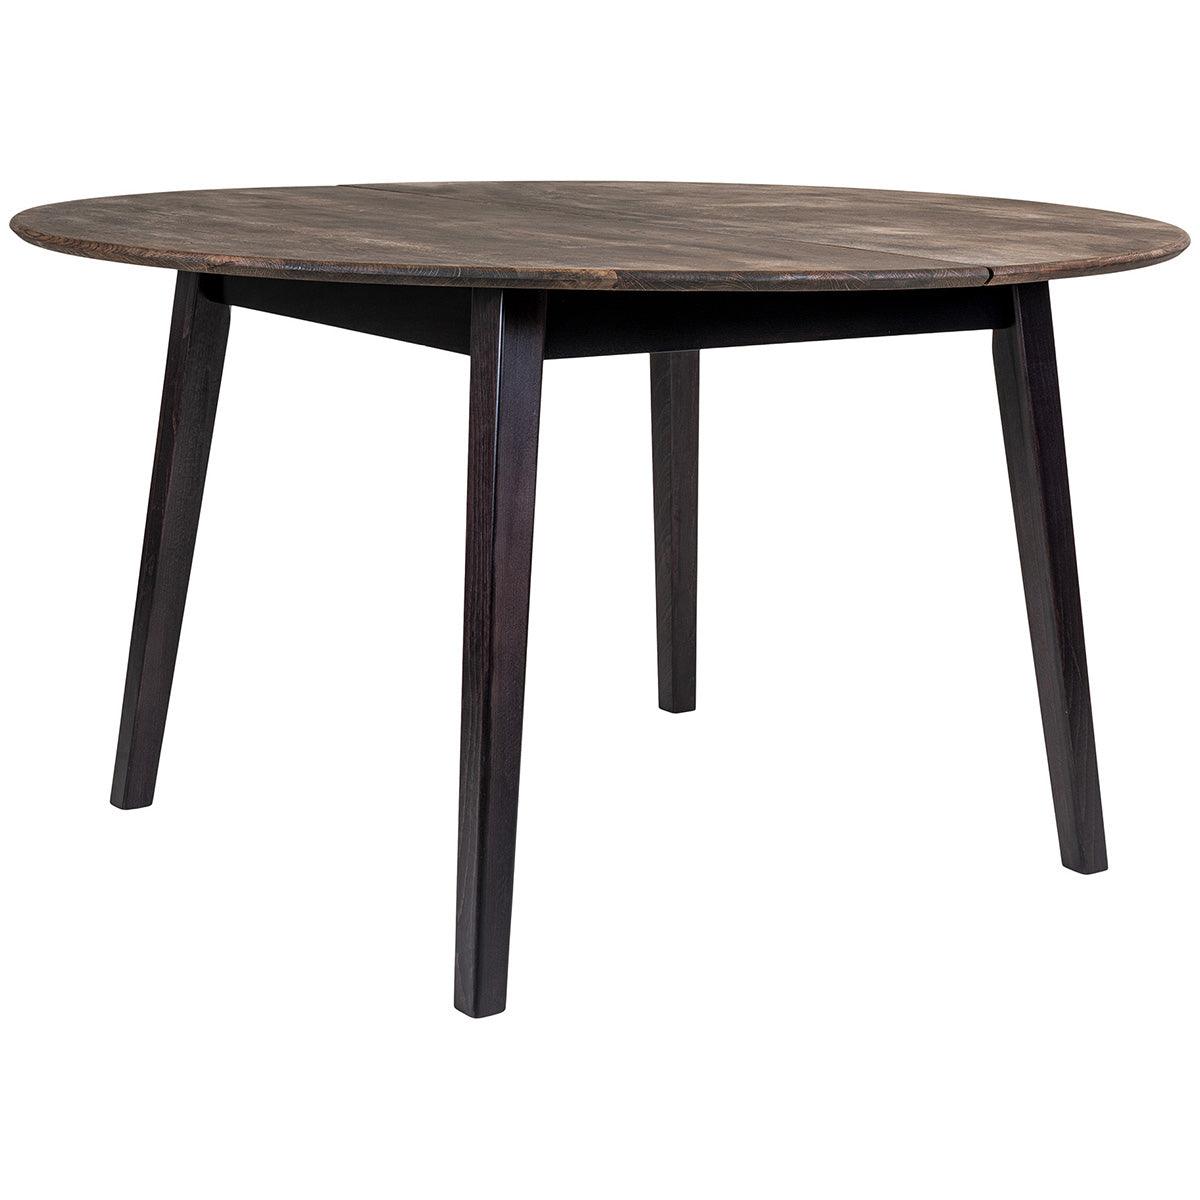 Marseille Oiled Oak Round Dining Table - WOO .Design